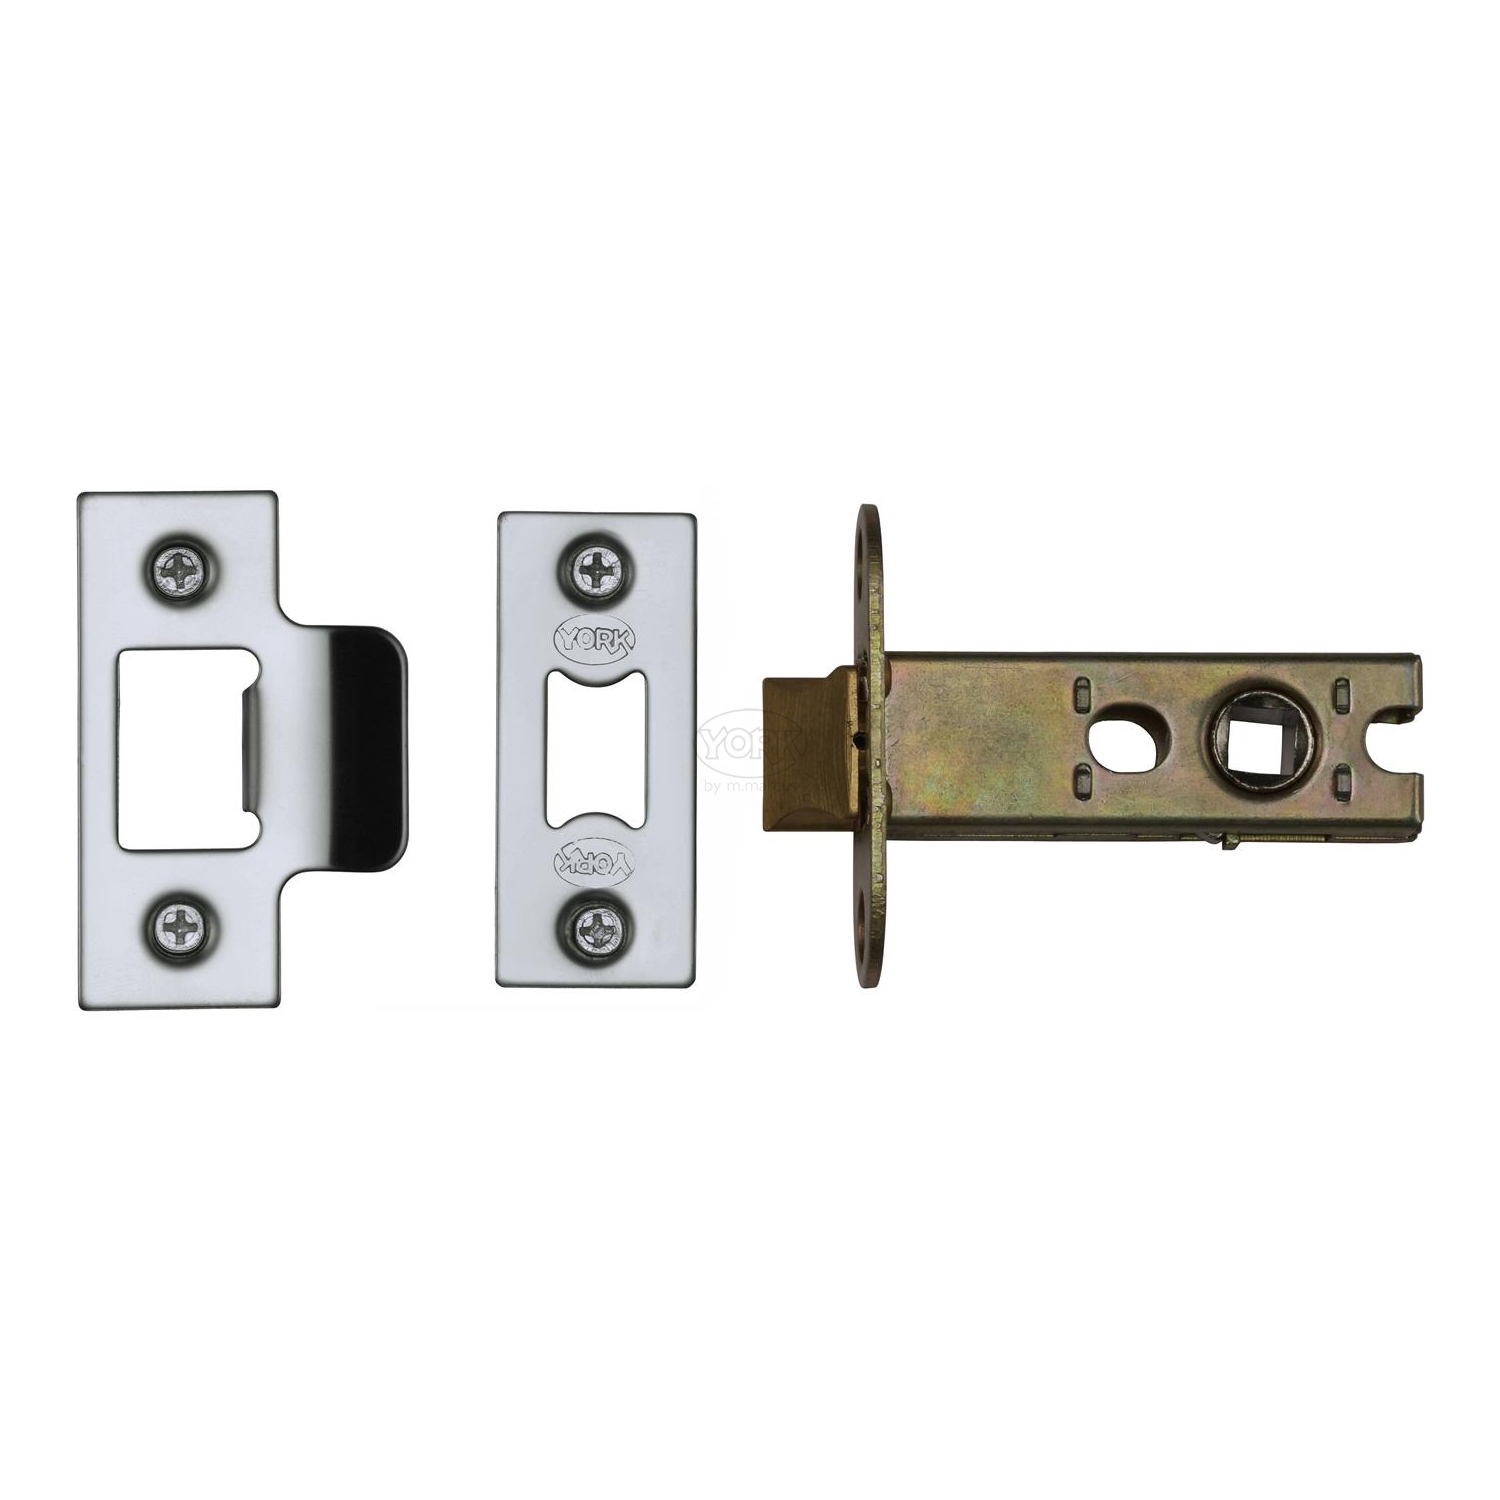 York Architechtural Tubular Latch For Sale - Period Home Style